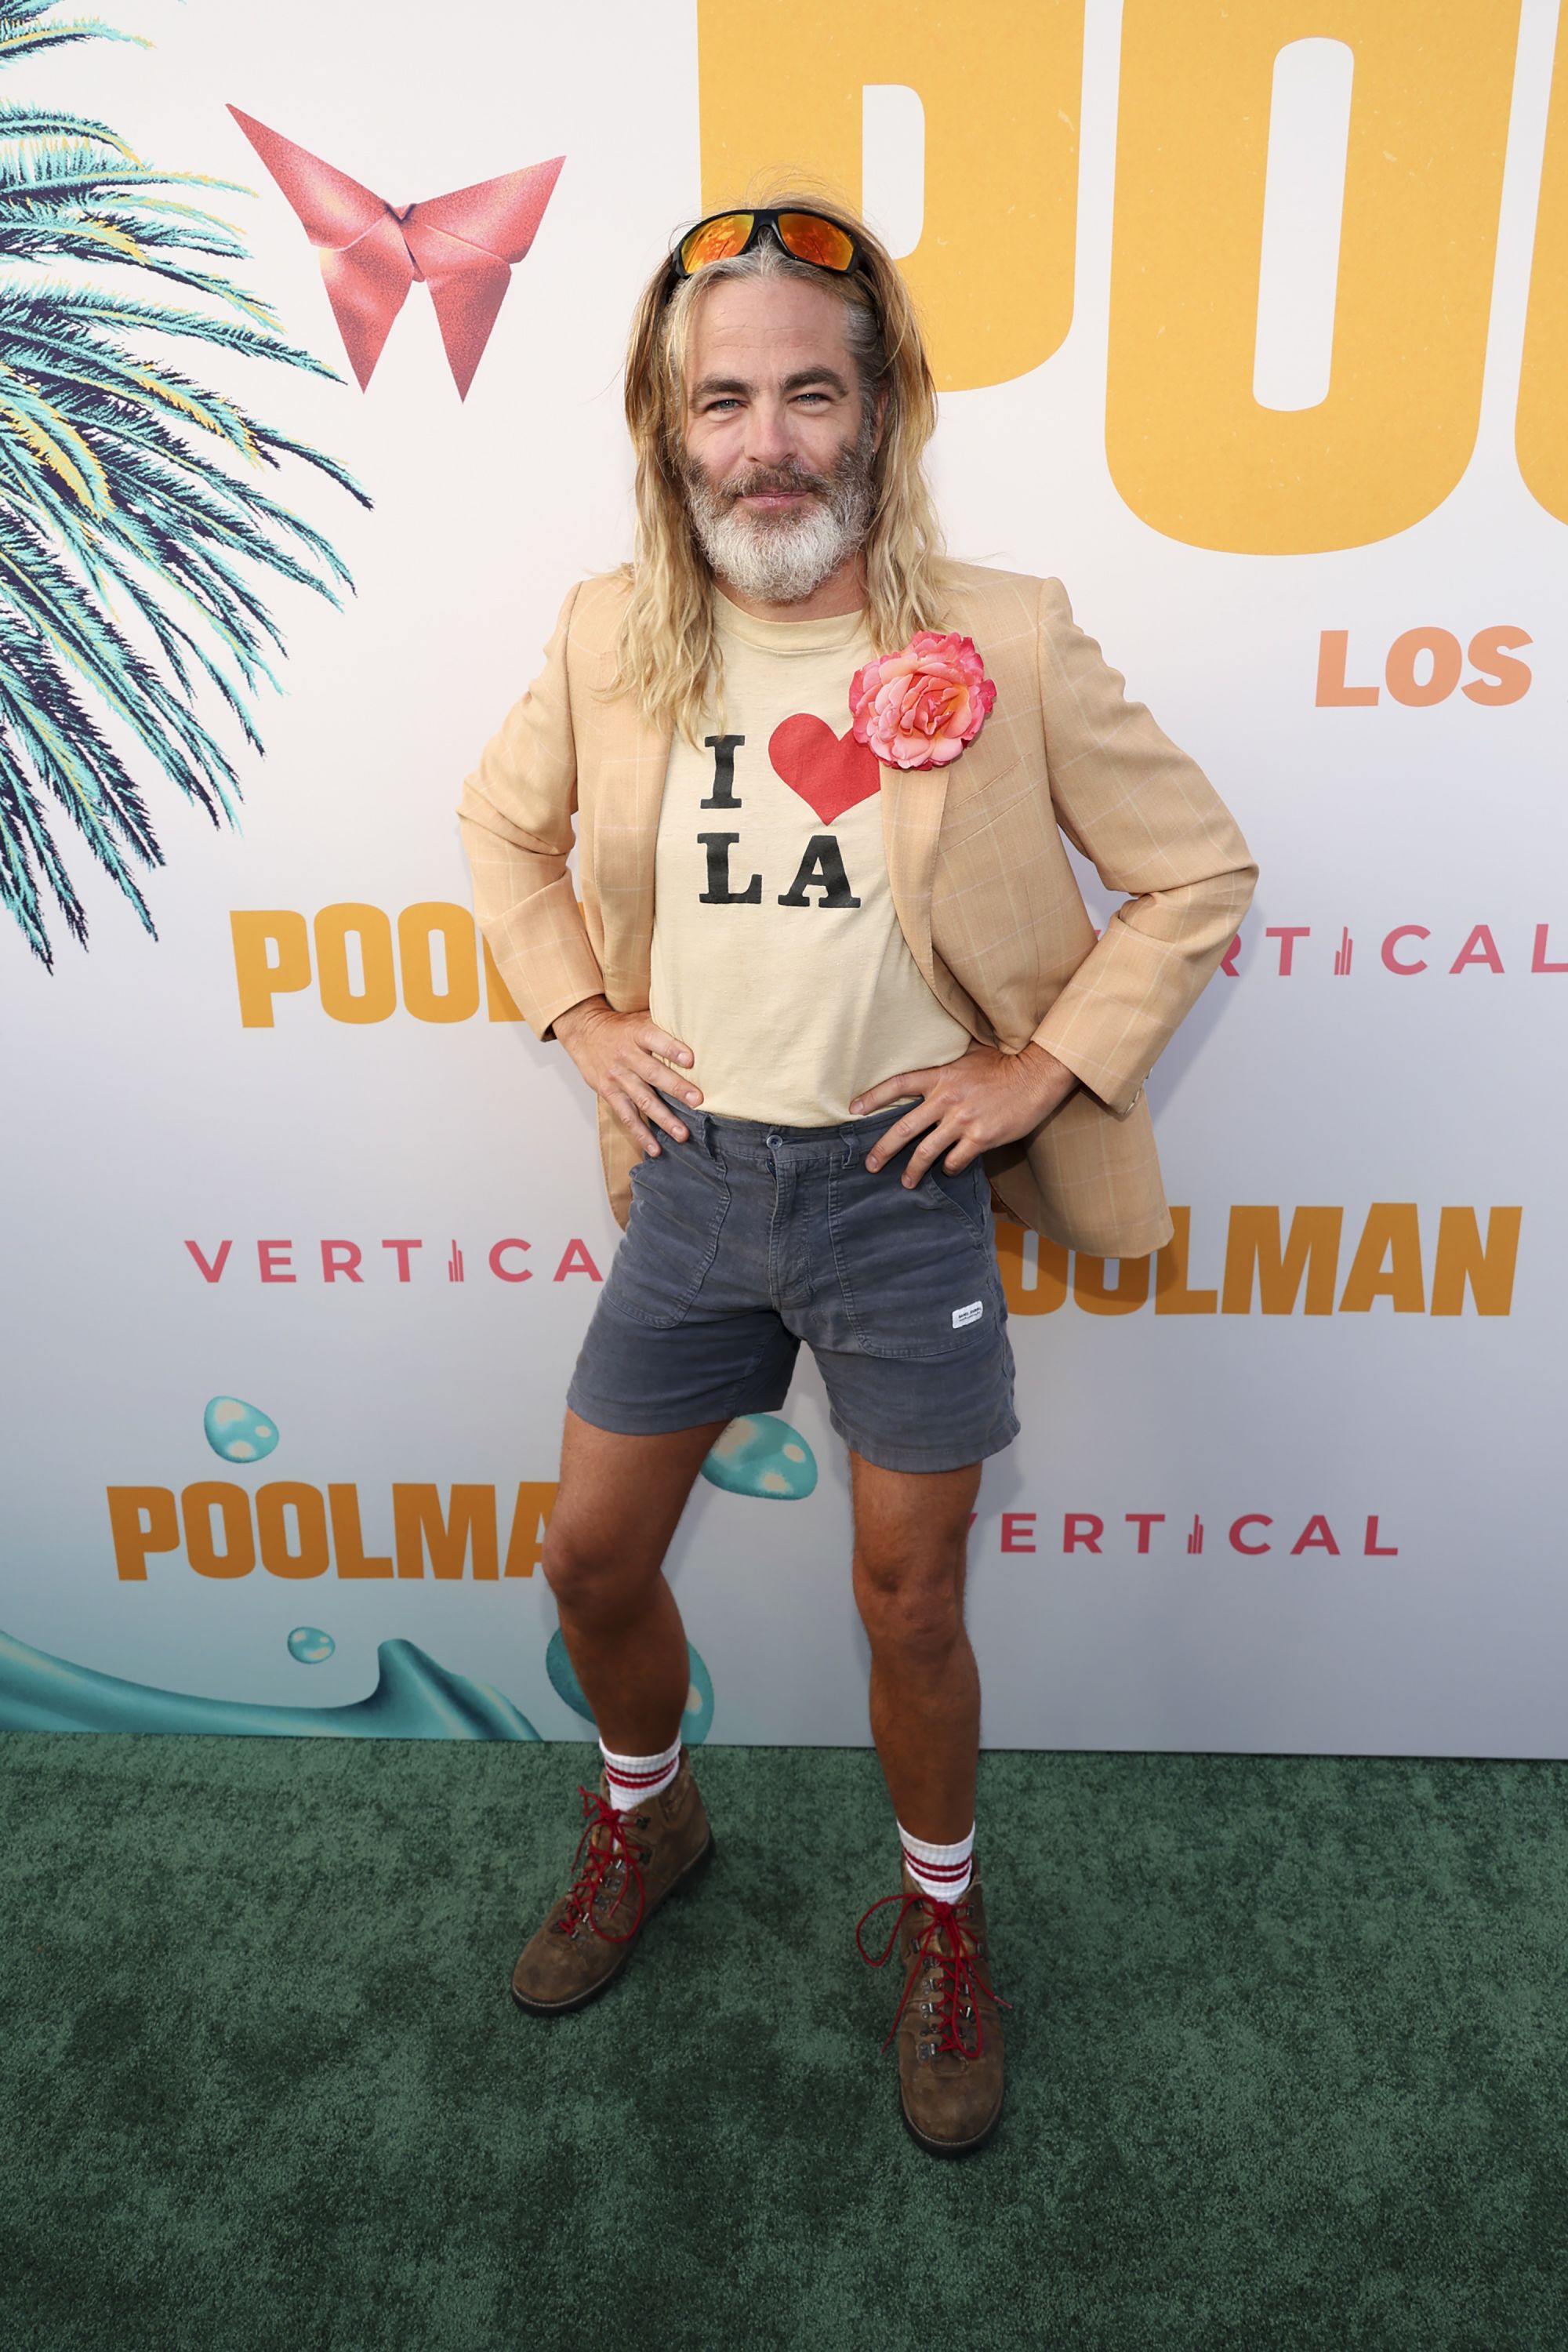 Chris Pine at the Los Angeles premiere of "Poolman" held at the Vista Theatre on April 24, 2024 in Los Angeles, Calfornia. (Photo by Jesse Grant/Variety via Getty Images)